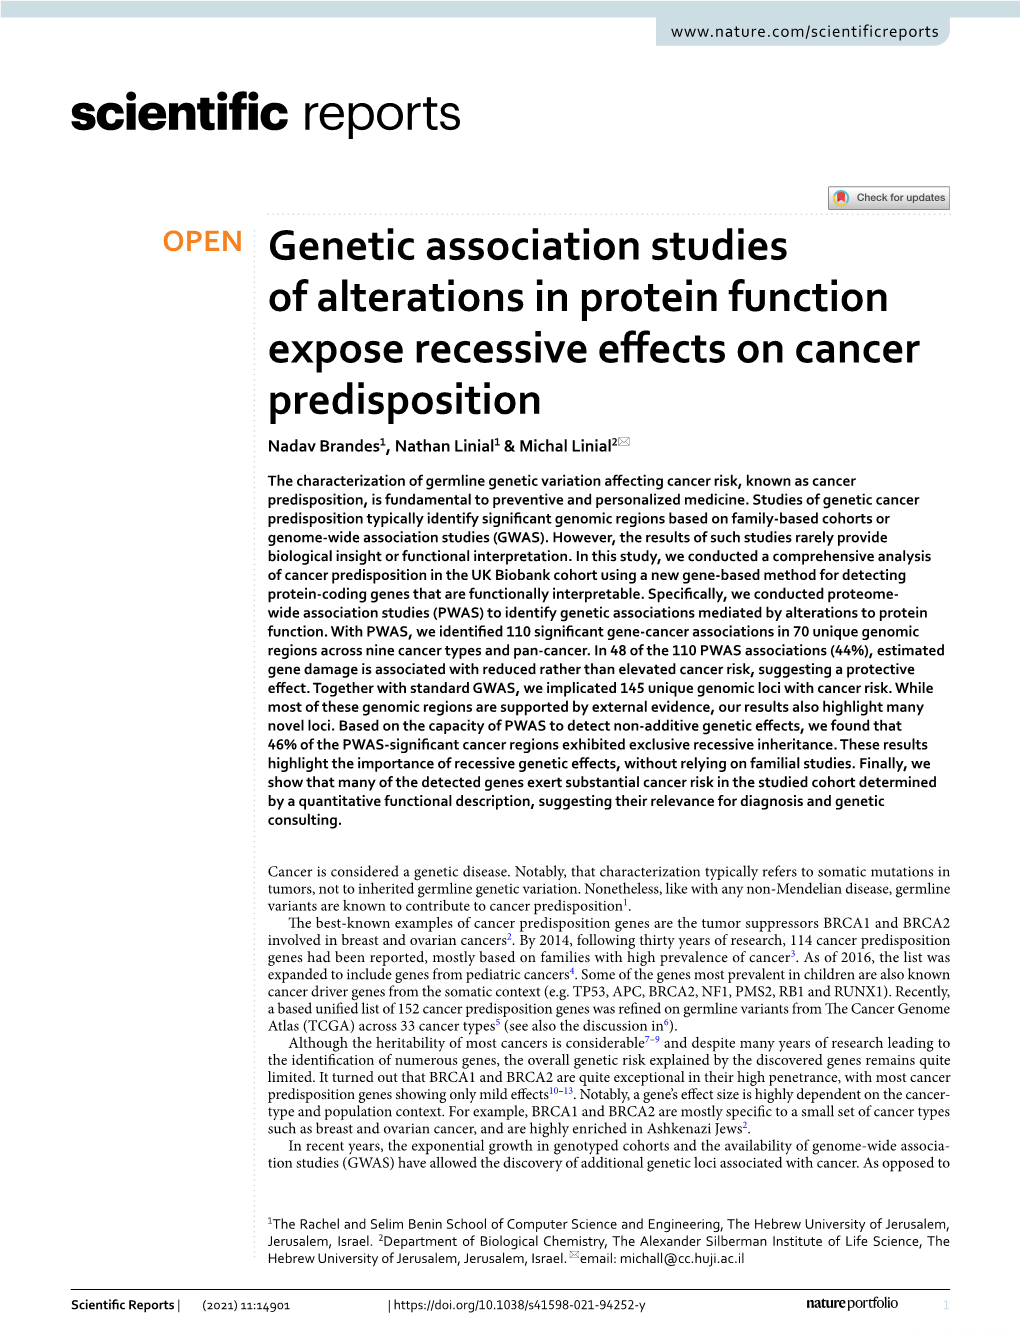 Genetic Association Studies of Alterations in Protein Function Expose Recessive Effects on Cancer Predisposition